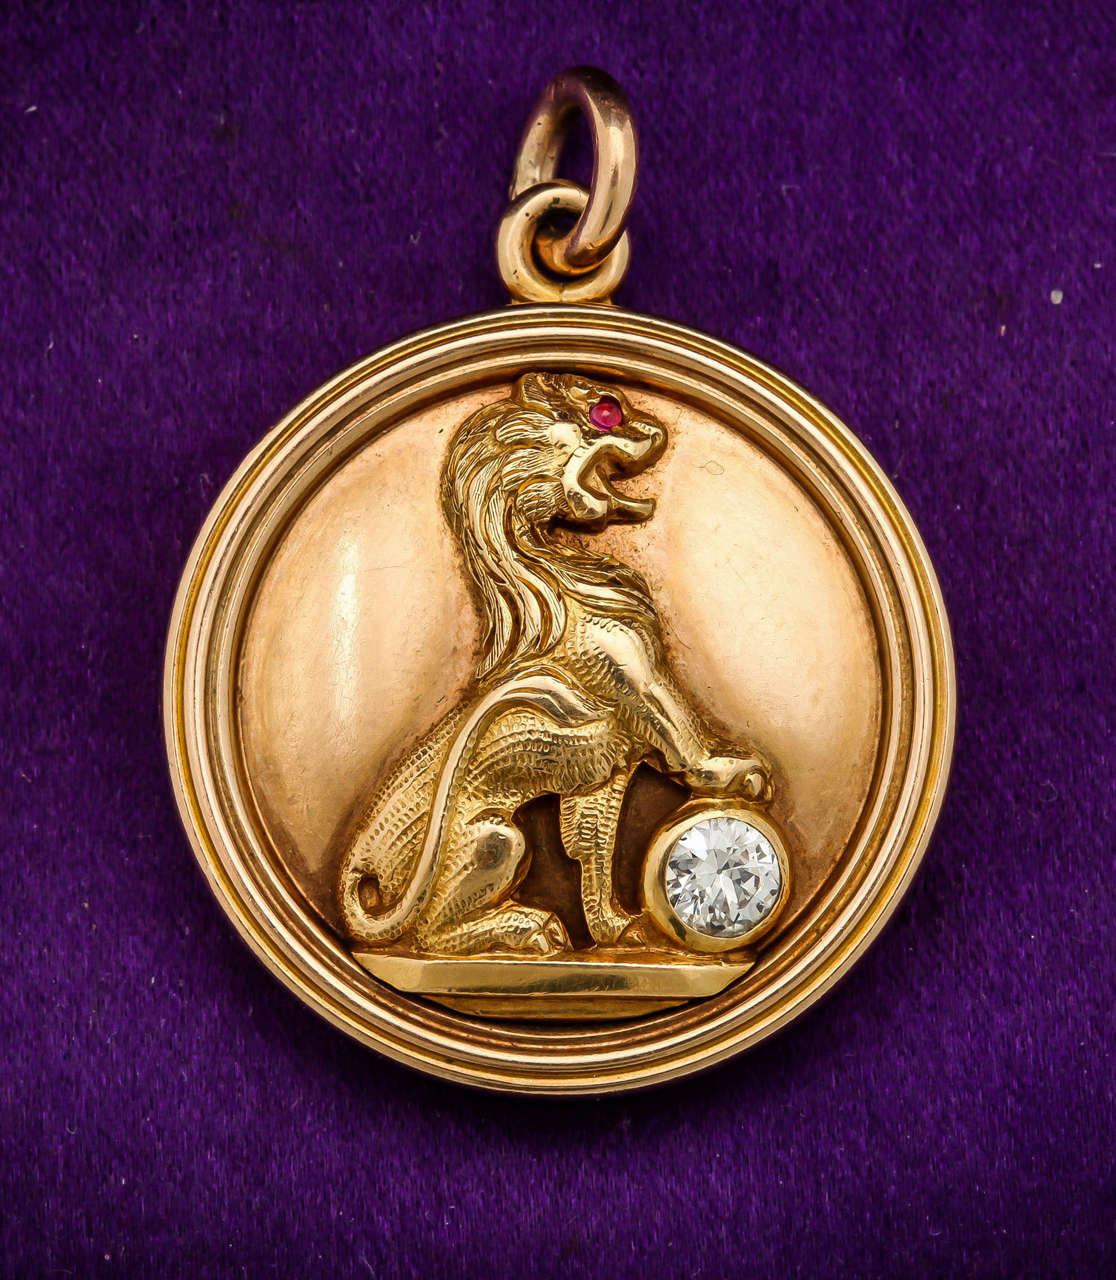 18kt yellow gold double-sided heavy locket designed with a handmade crafted figural lion resting his paw on a .20ct old mine cut diamond with a faceted ruby set in lions eye it may hold two photographs on each side made in the Victorian era in the